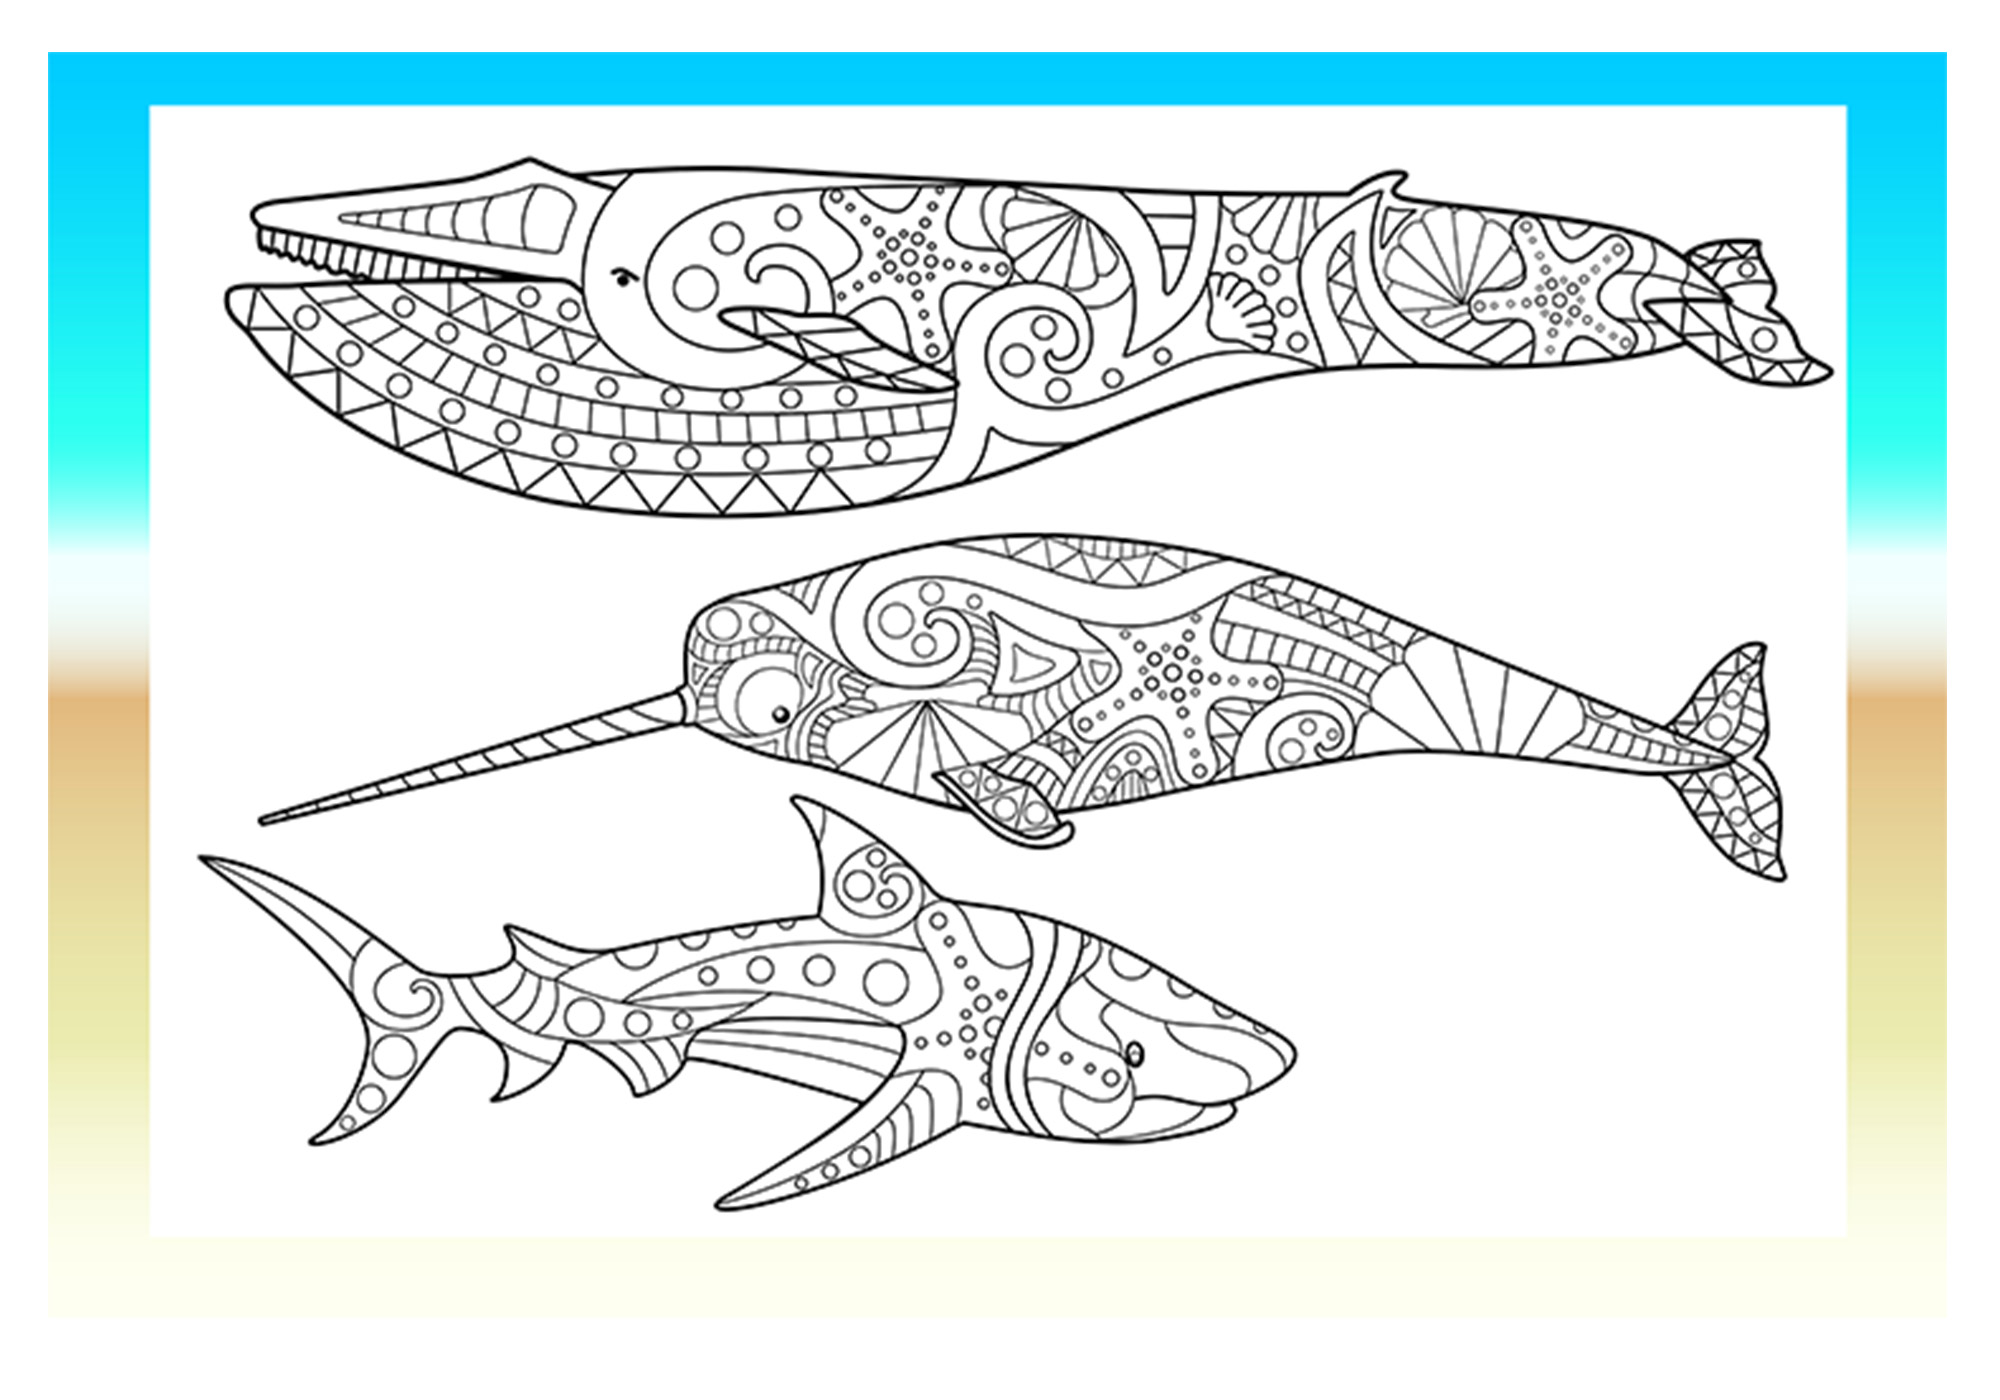 Coloring page with three different types of fish.